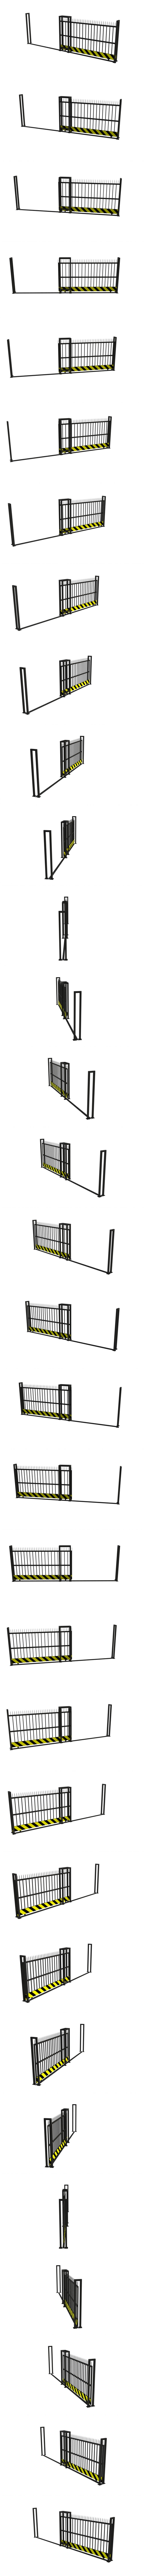 gsg-s-vehicle-gate-barriers 360